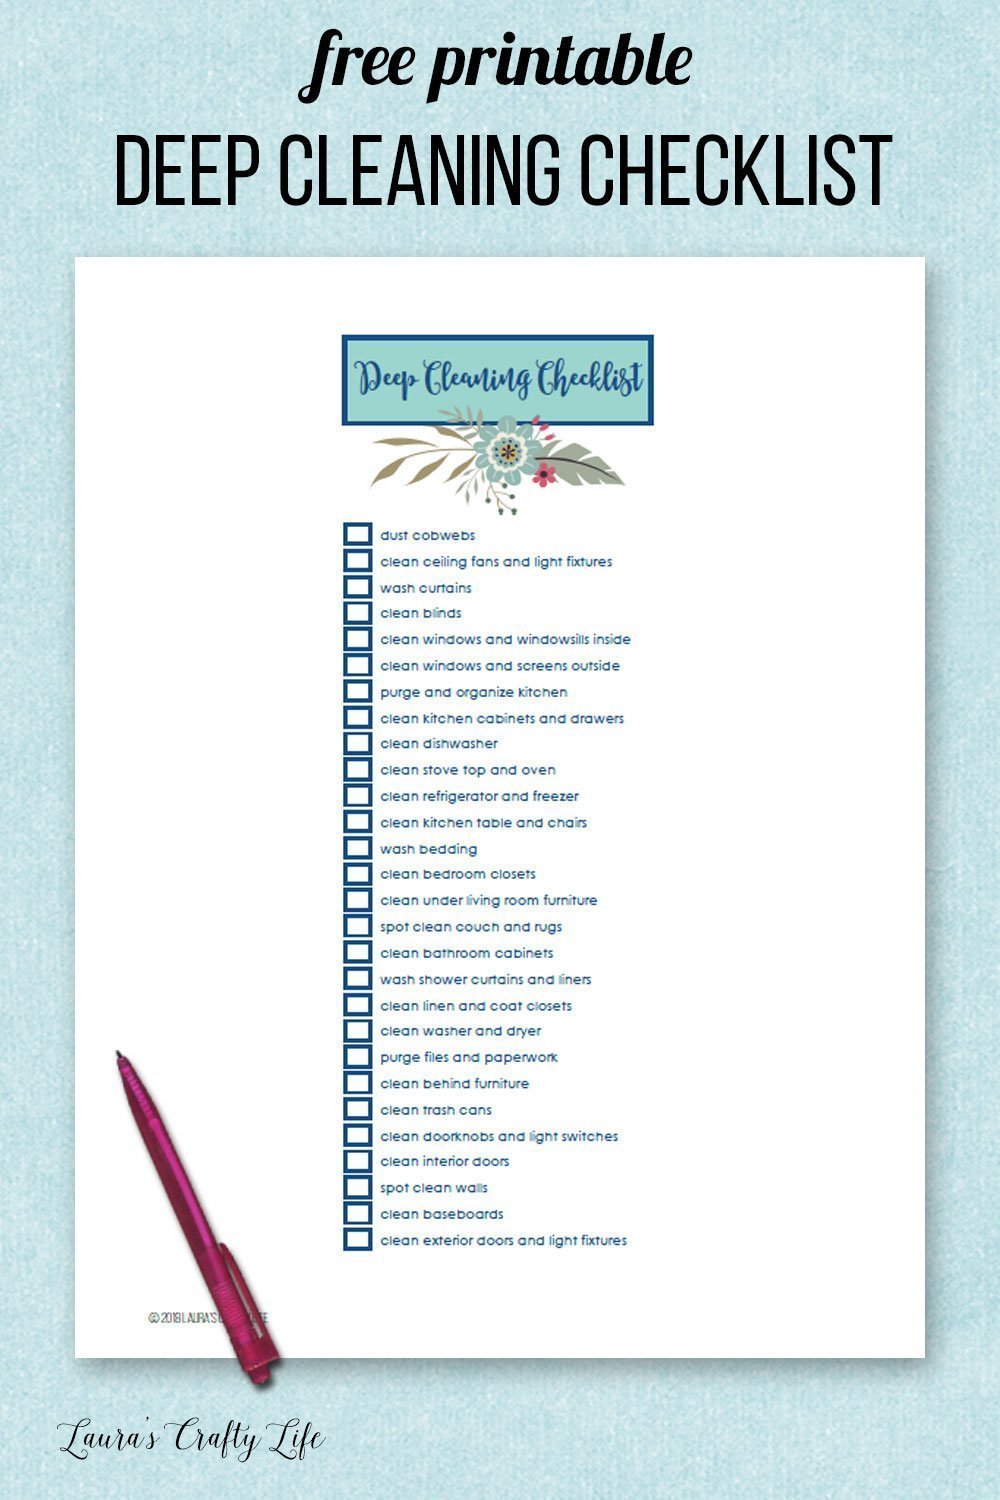 Free printable deep cleaning checklist